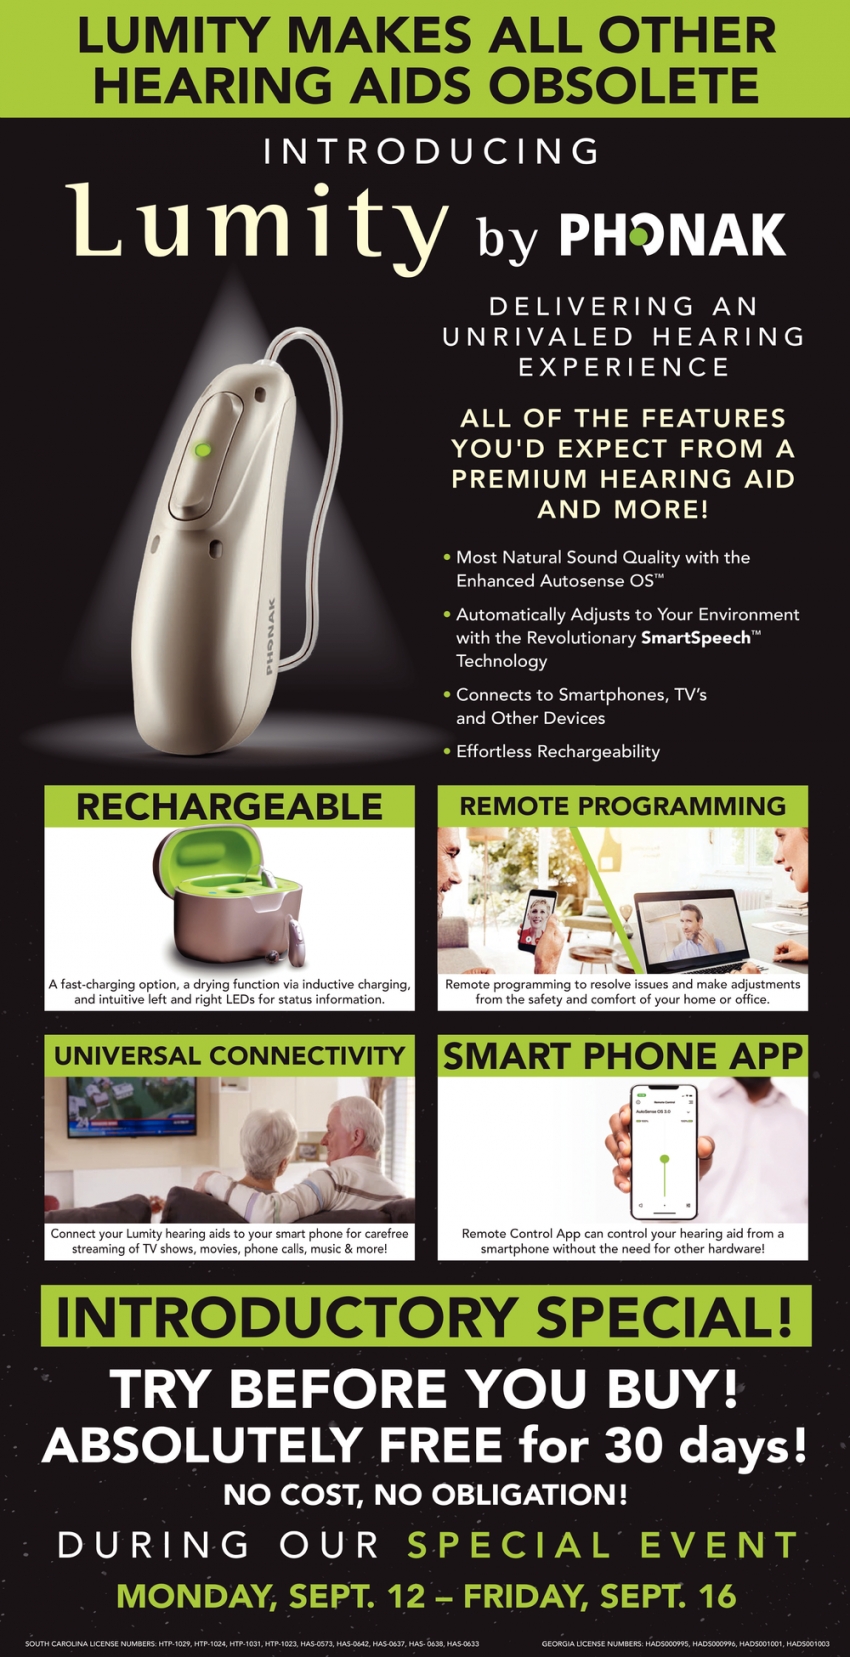 Introducing Lumity By Phonak